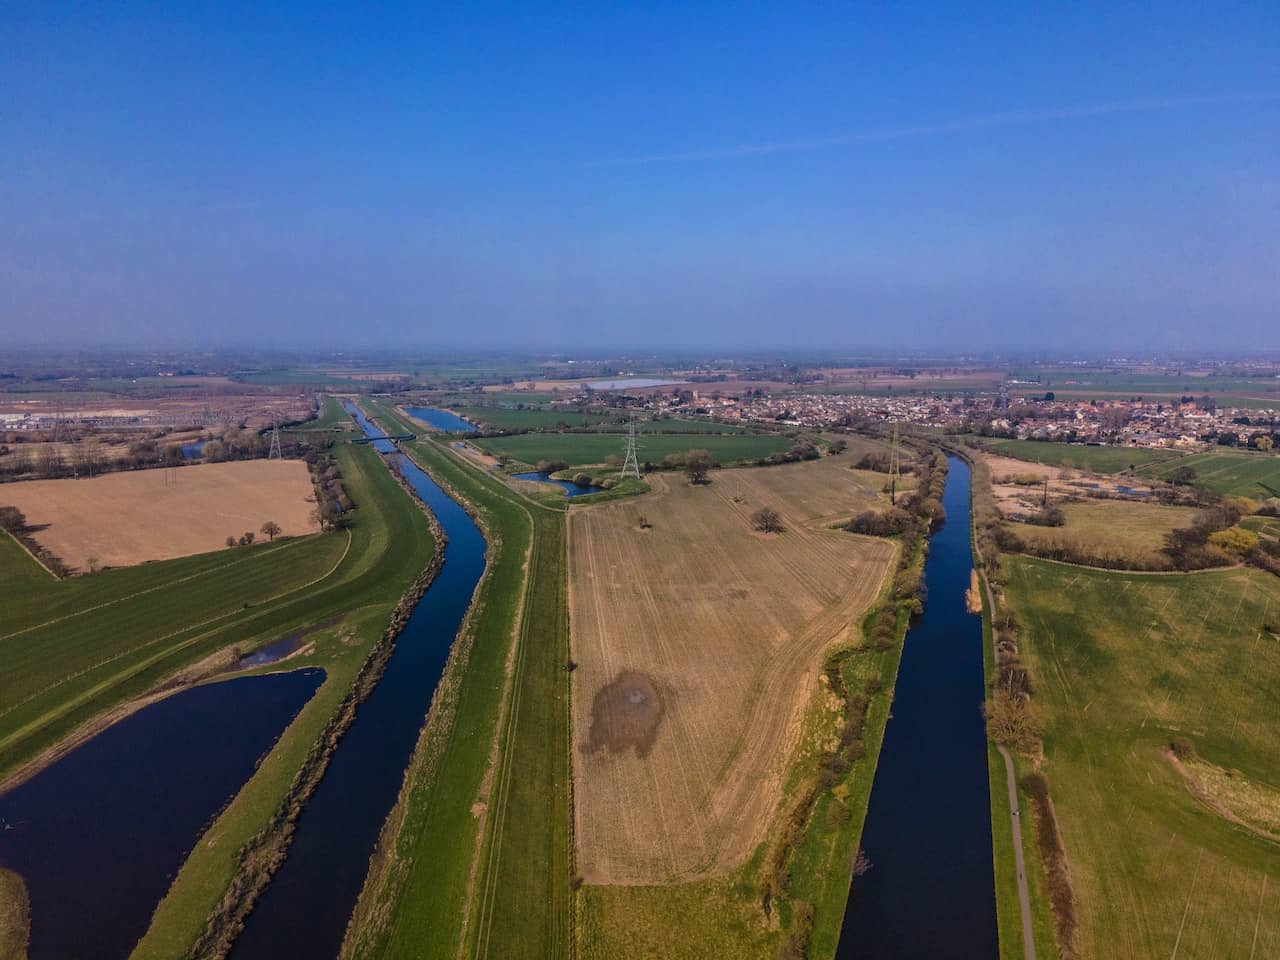 image of irrigation canals running through farm land